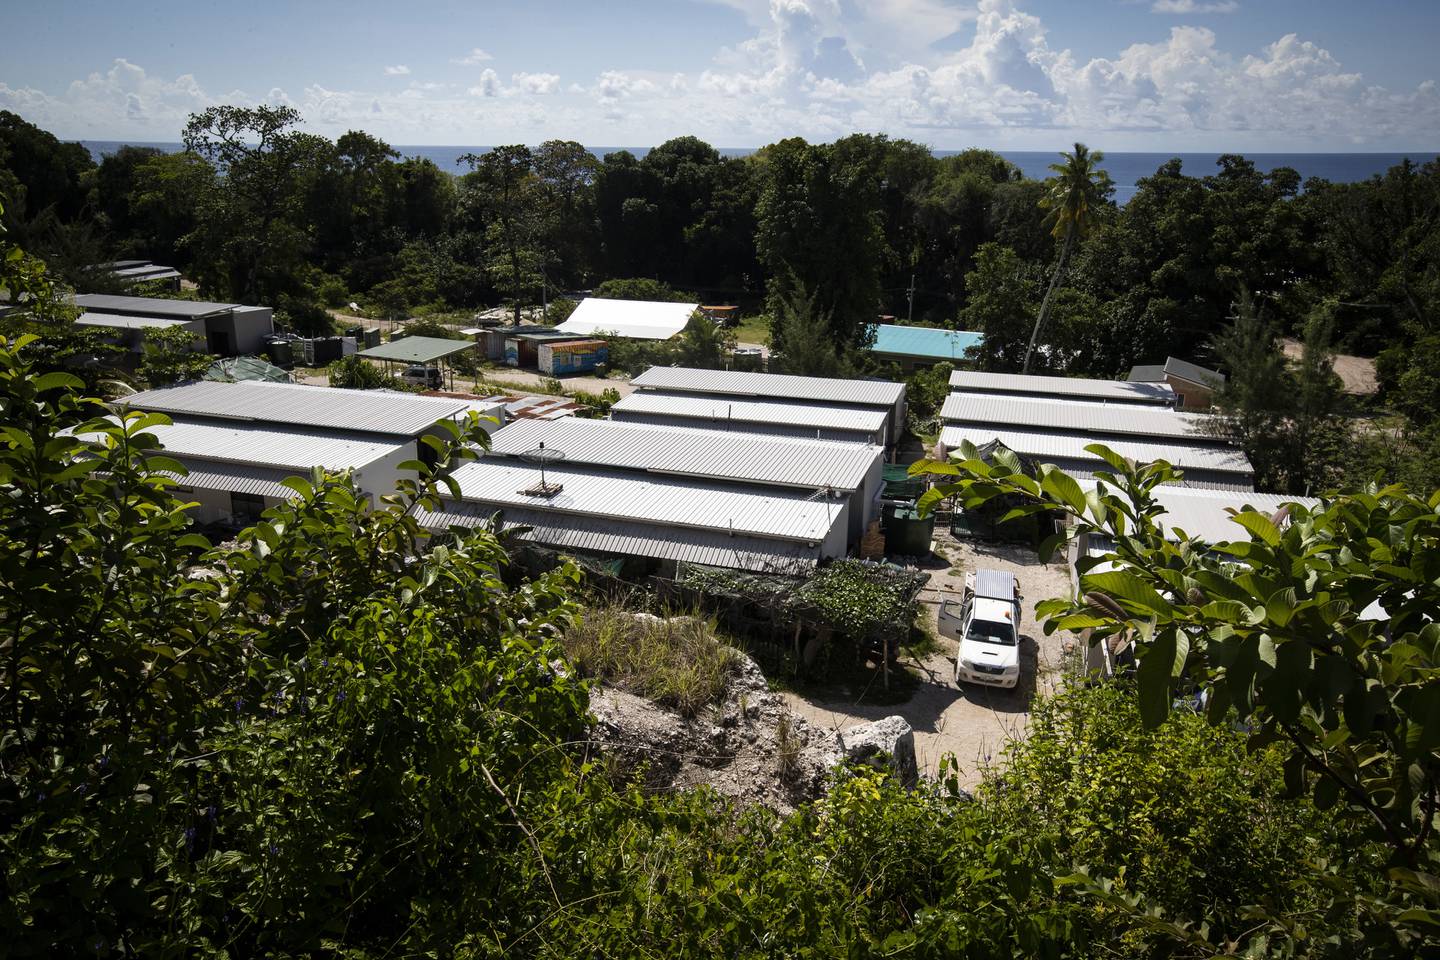 FILE - This Sept. 4, 2018, file photo shows Nibok refugee settlement on Nauru. Australia announced on Sunday, Feb. 3, 2019 that the last child refugees held on the Pacific atoll of Nauru will soon the sent to the United States, ending the banishment of children under the government's harsh asylum-seeker policy as elections loom. (Jason Oxenham/Pool Photo via AP, File)